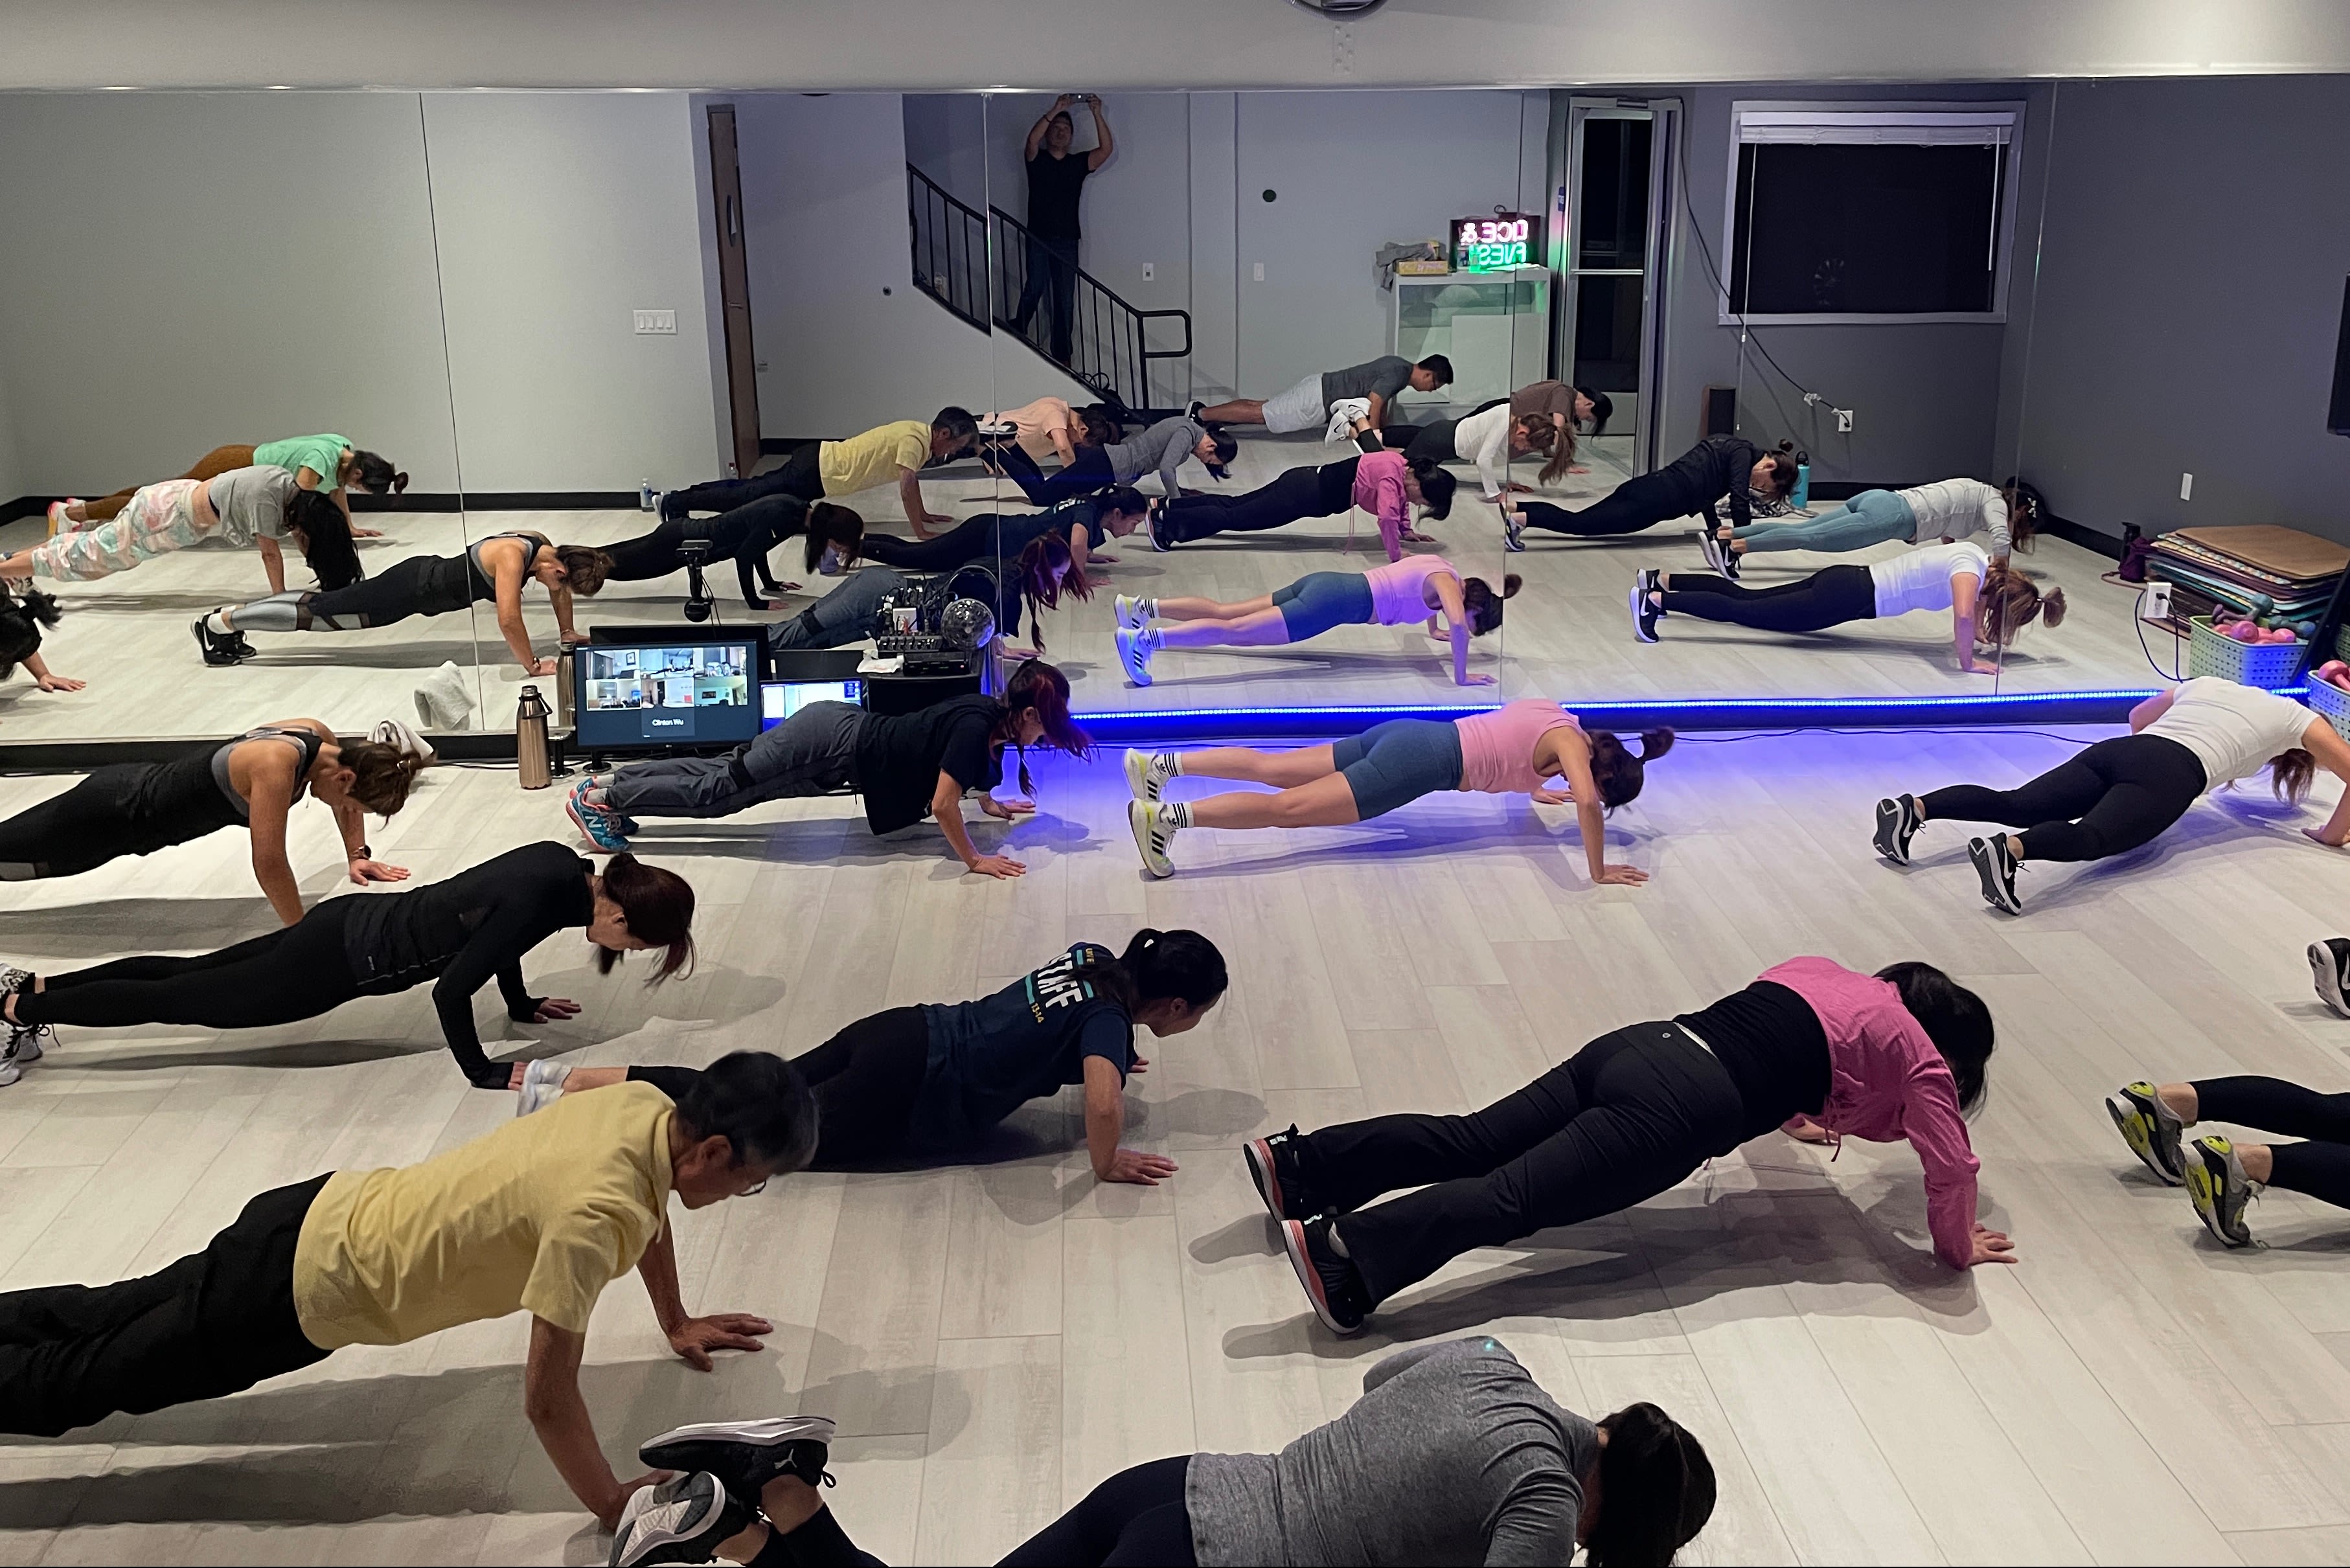 Unos Dance Fitness Center: Read Reviews and Book Classes on ClassPass